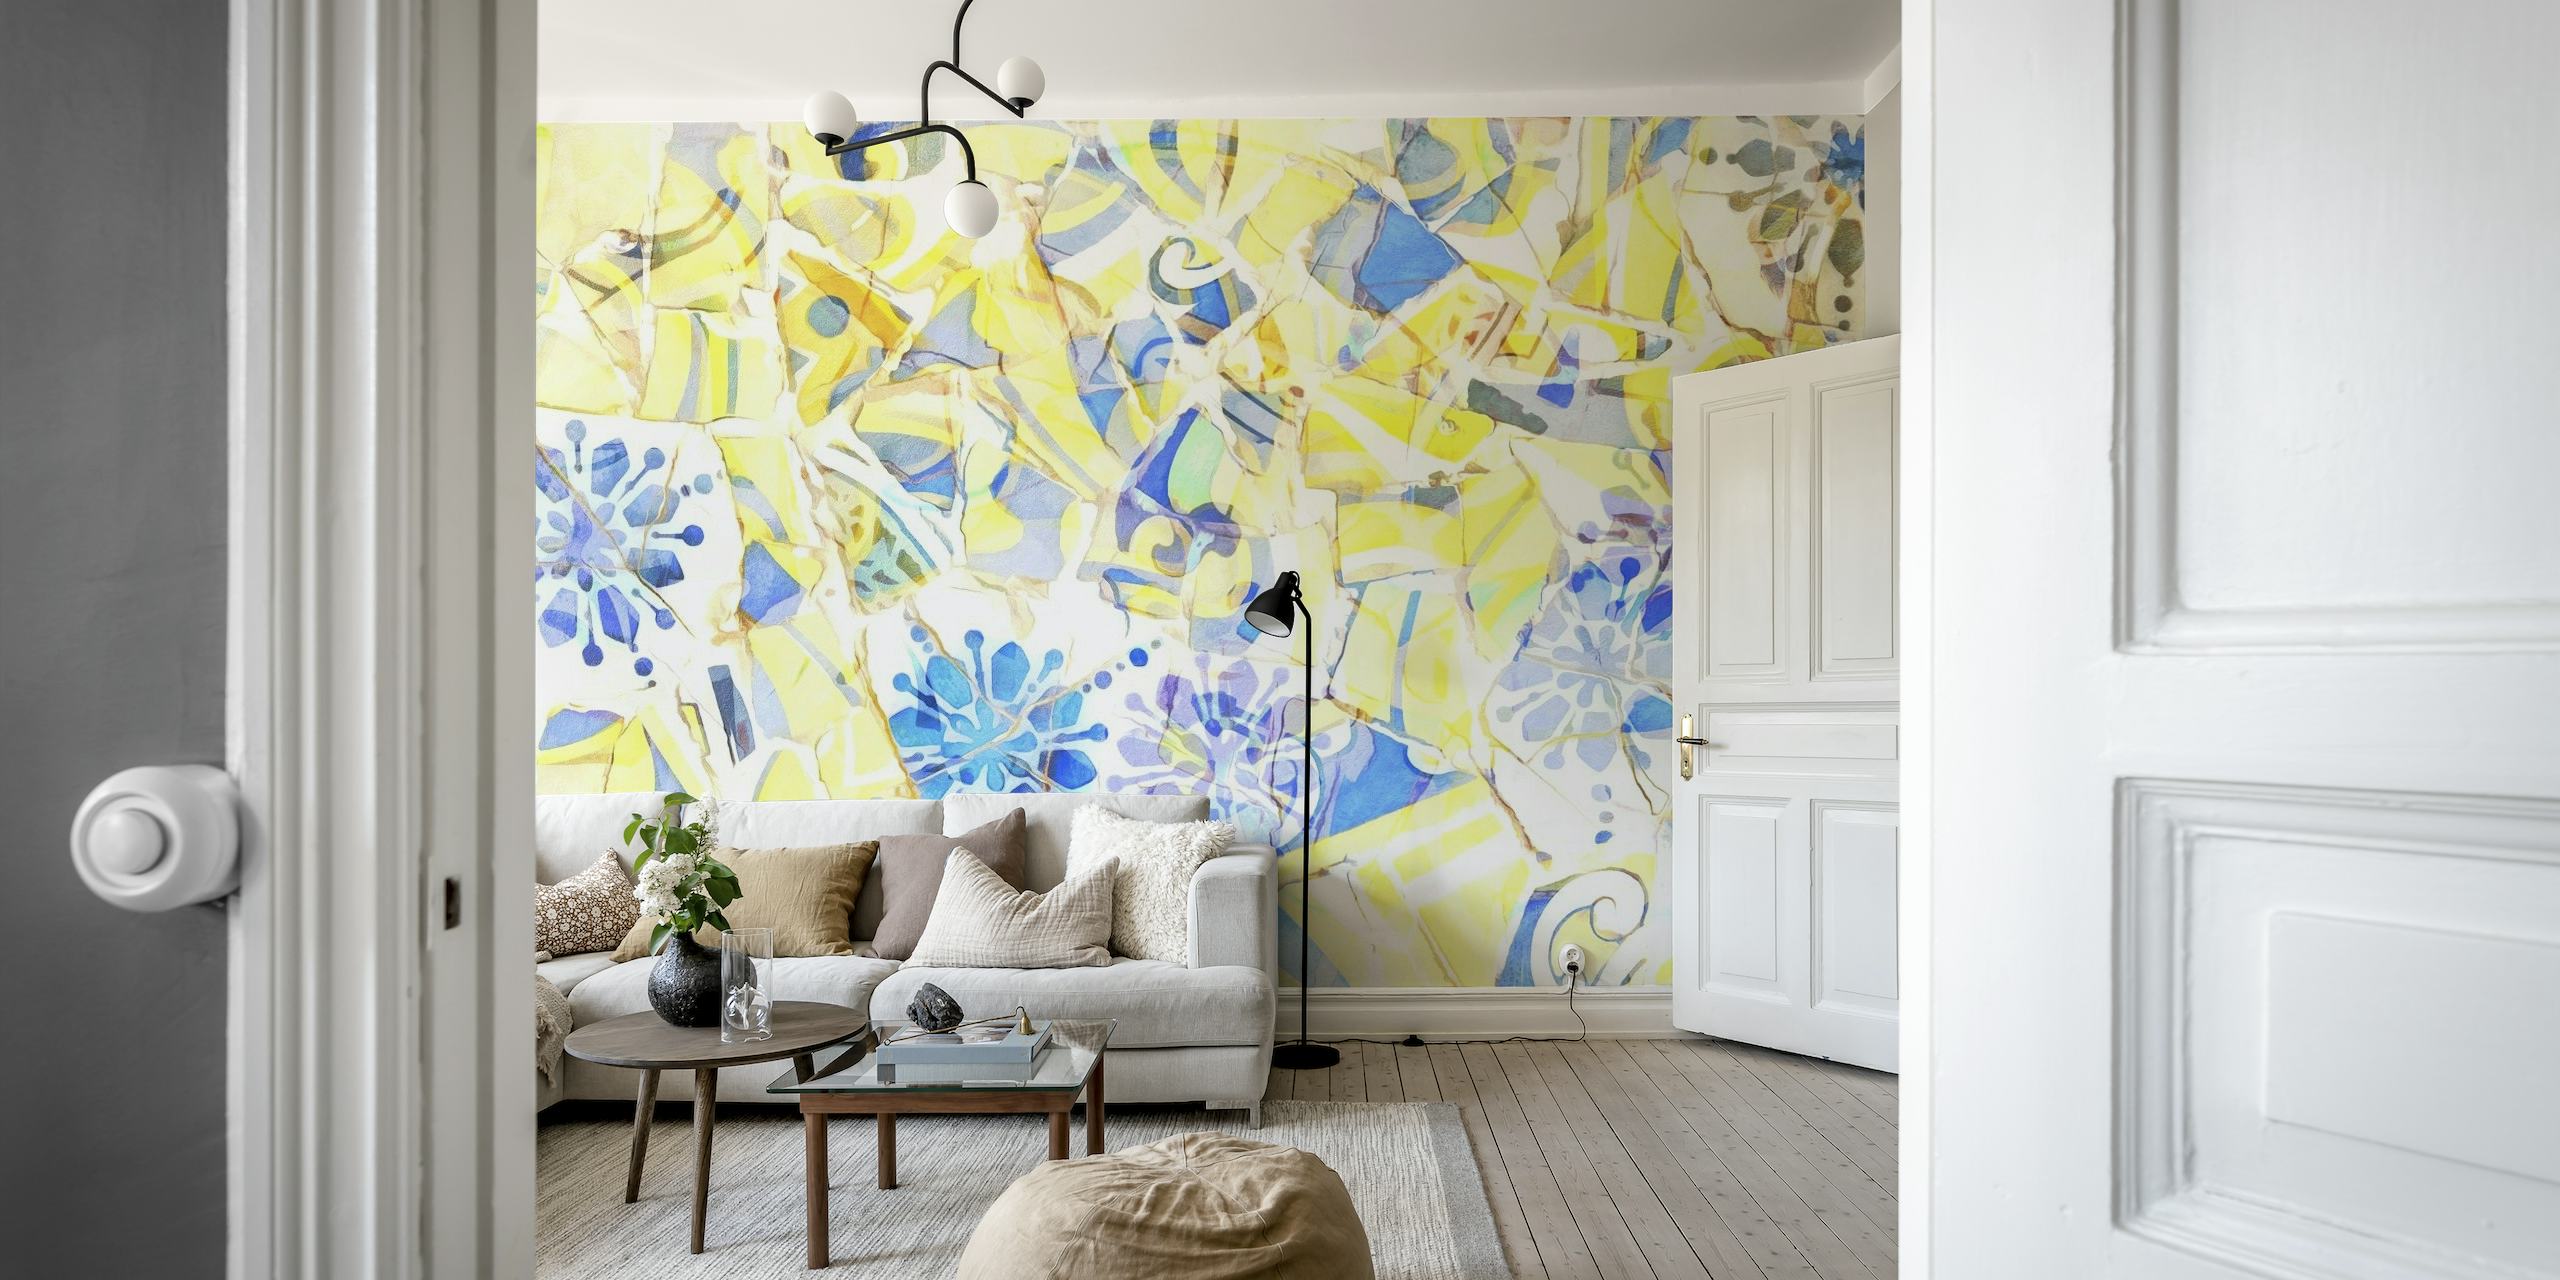 Abstract mosaic wall mural with pastel and bright colors, inspired by Barcelona's artistic mosaics